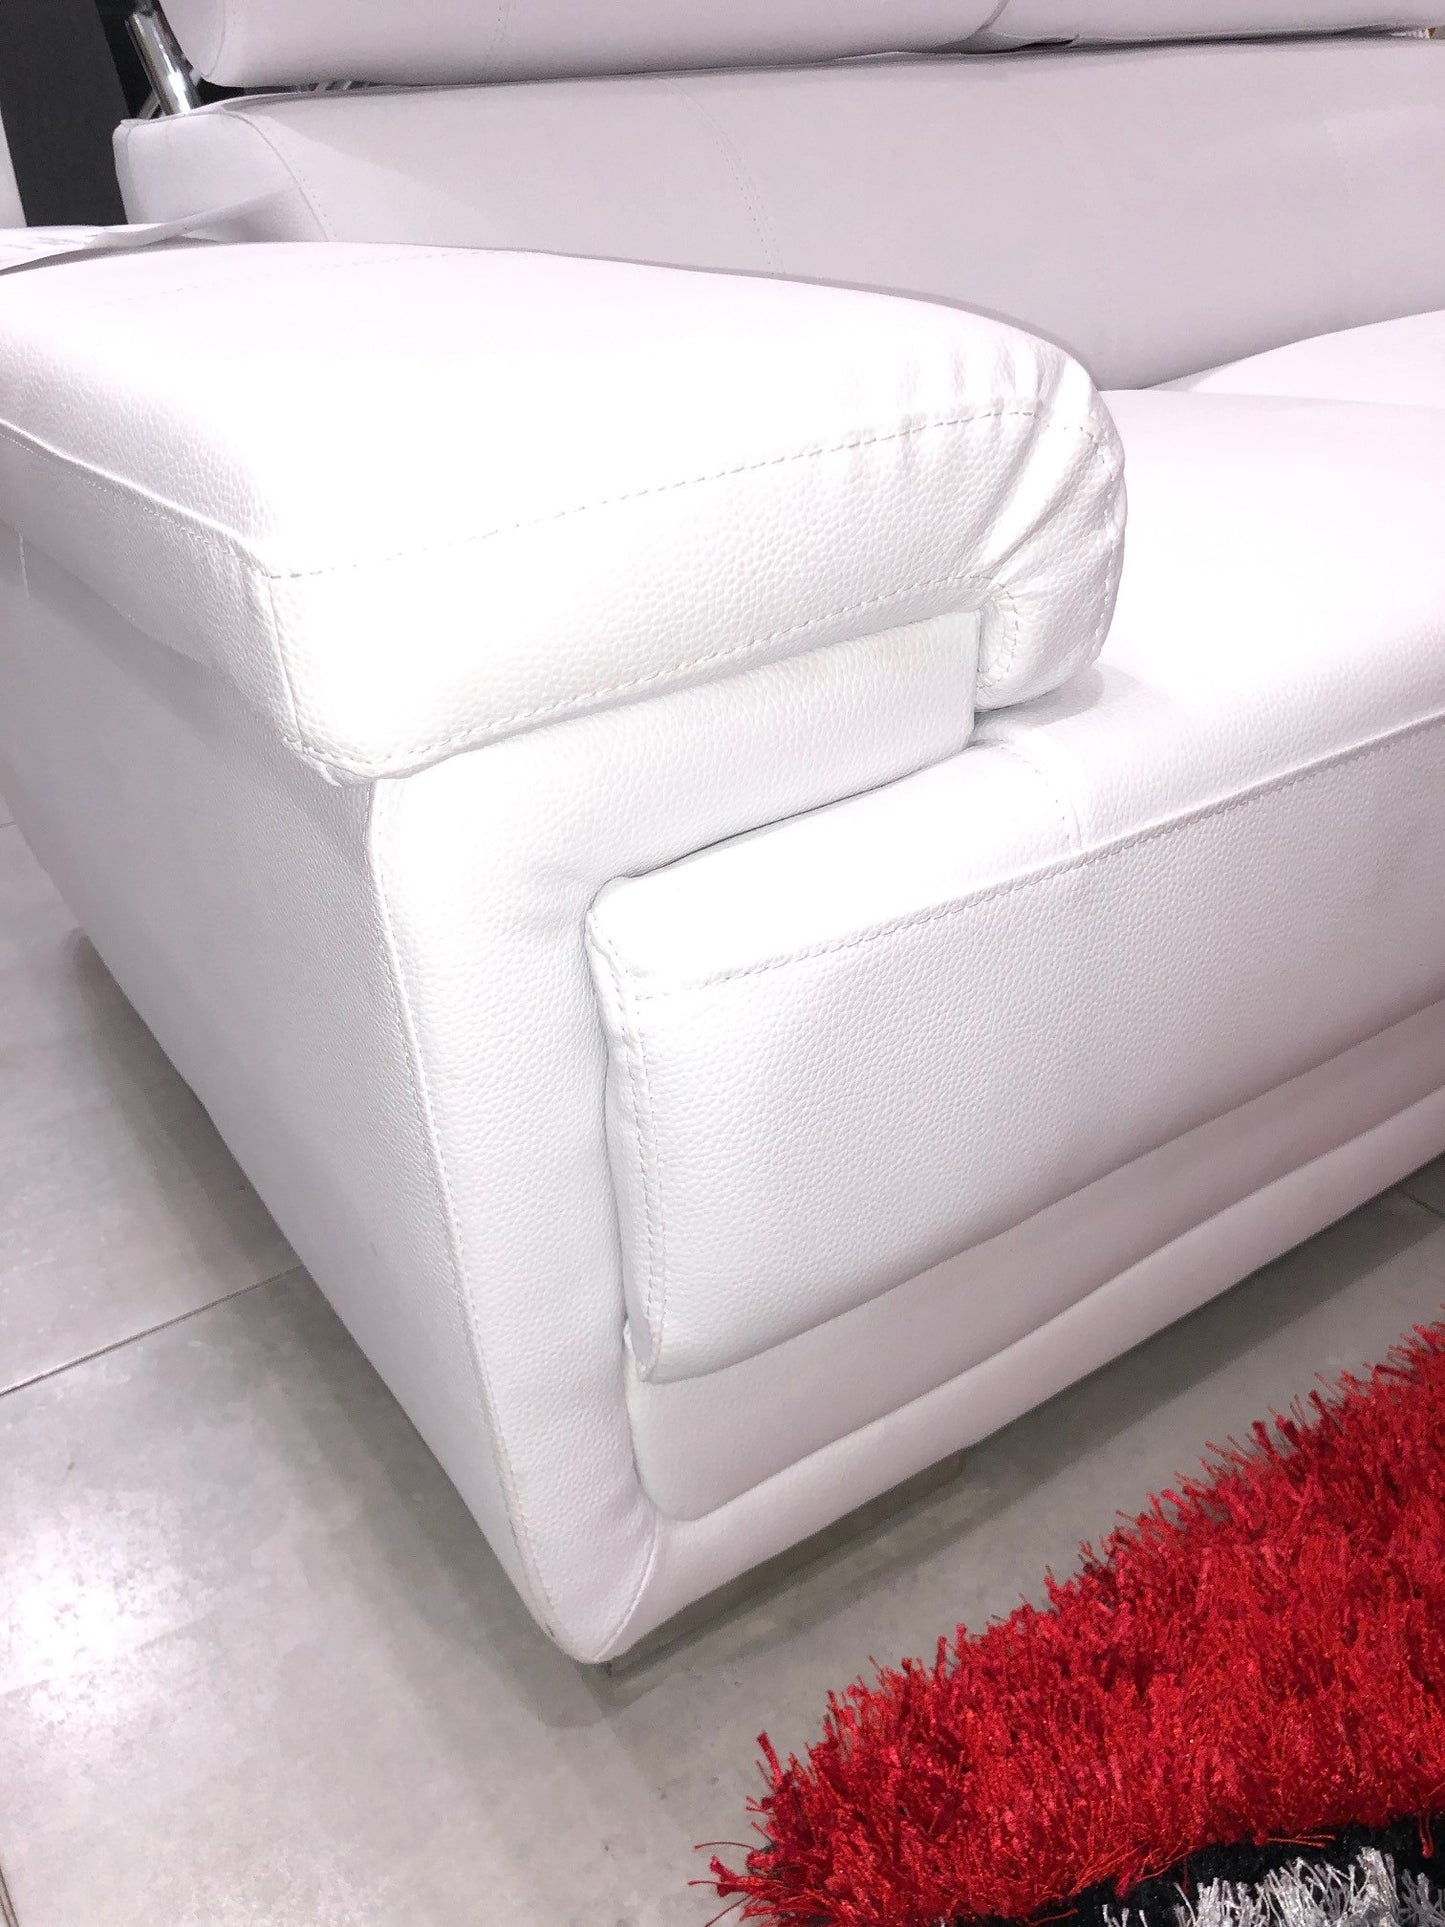 ZOEY White Sofa and Loveseat